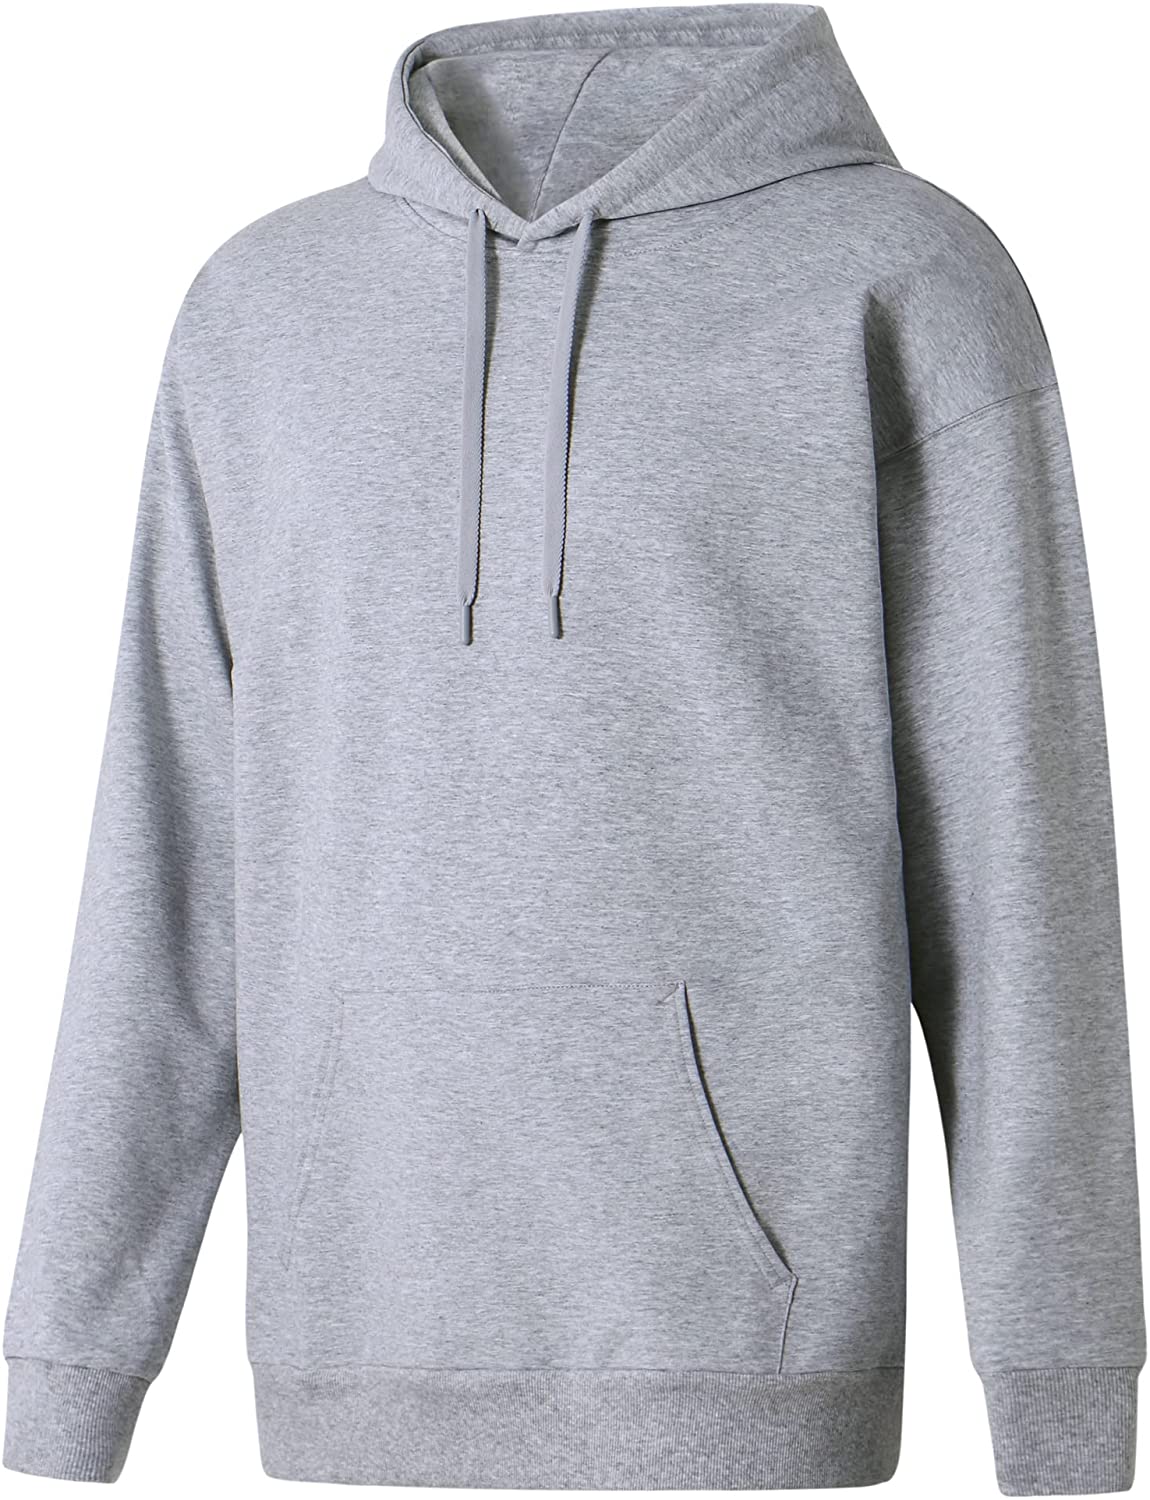 THE GYM PEOPLE Men's Pullover Hoodie Loose fit Heavyweight Ultra